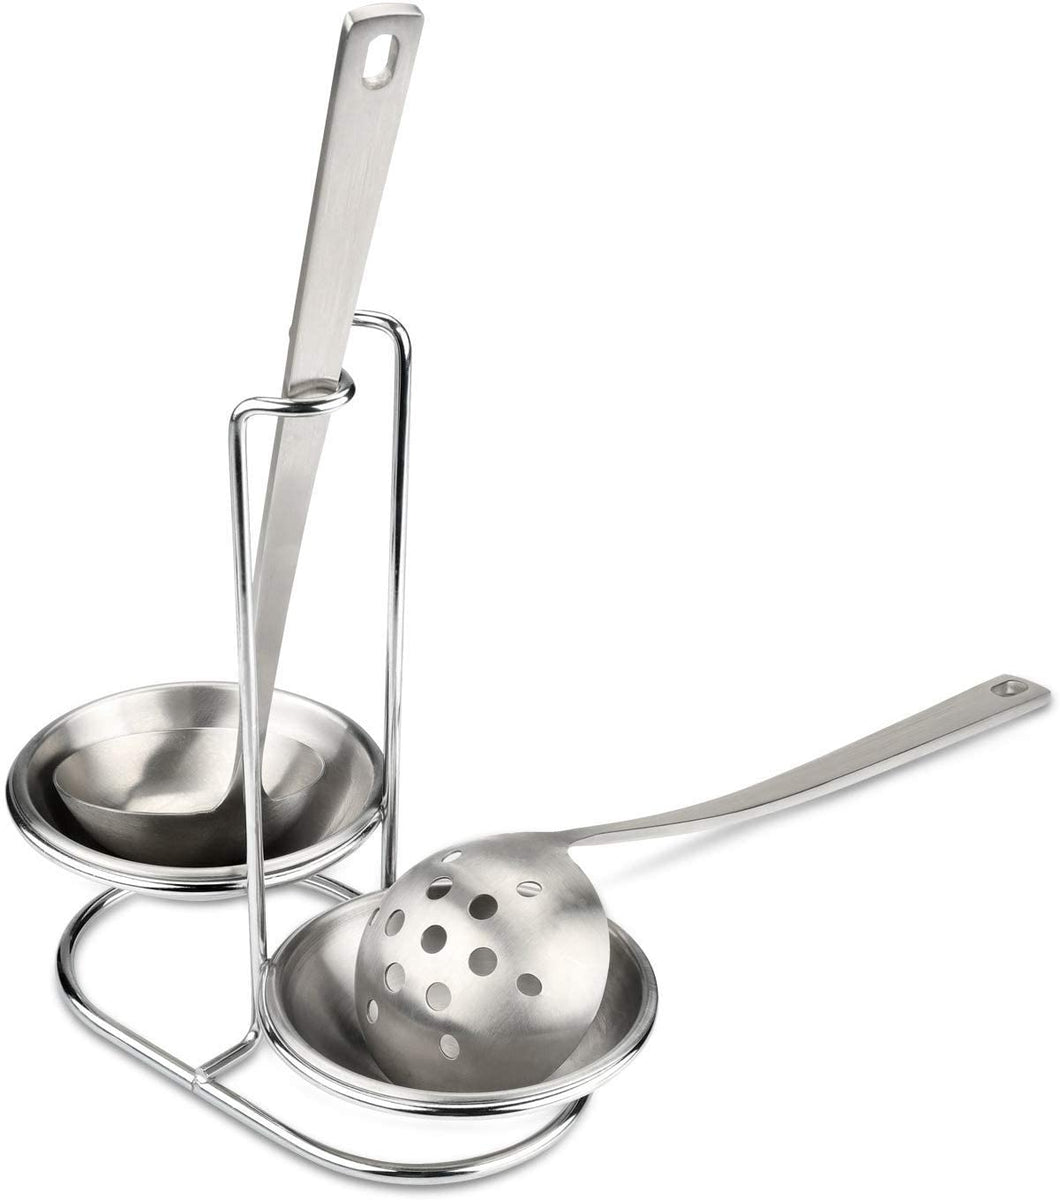 Stainless Steel Double Ladles Holder